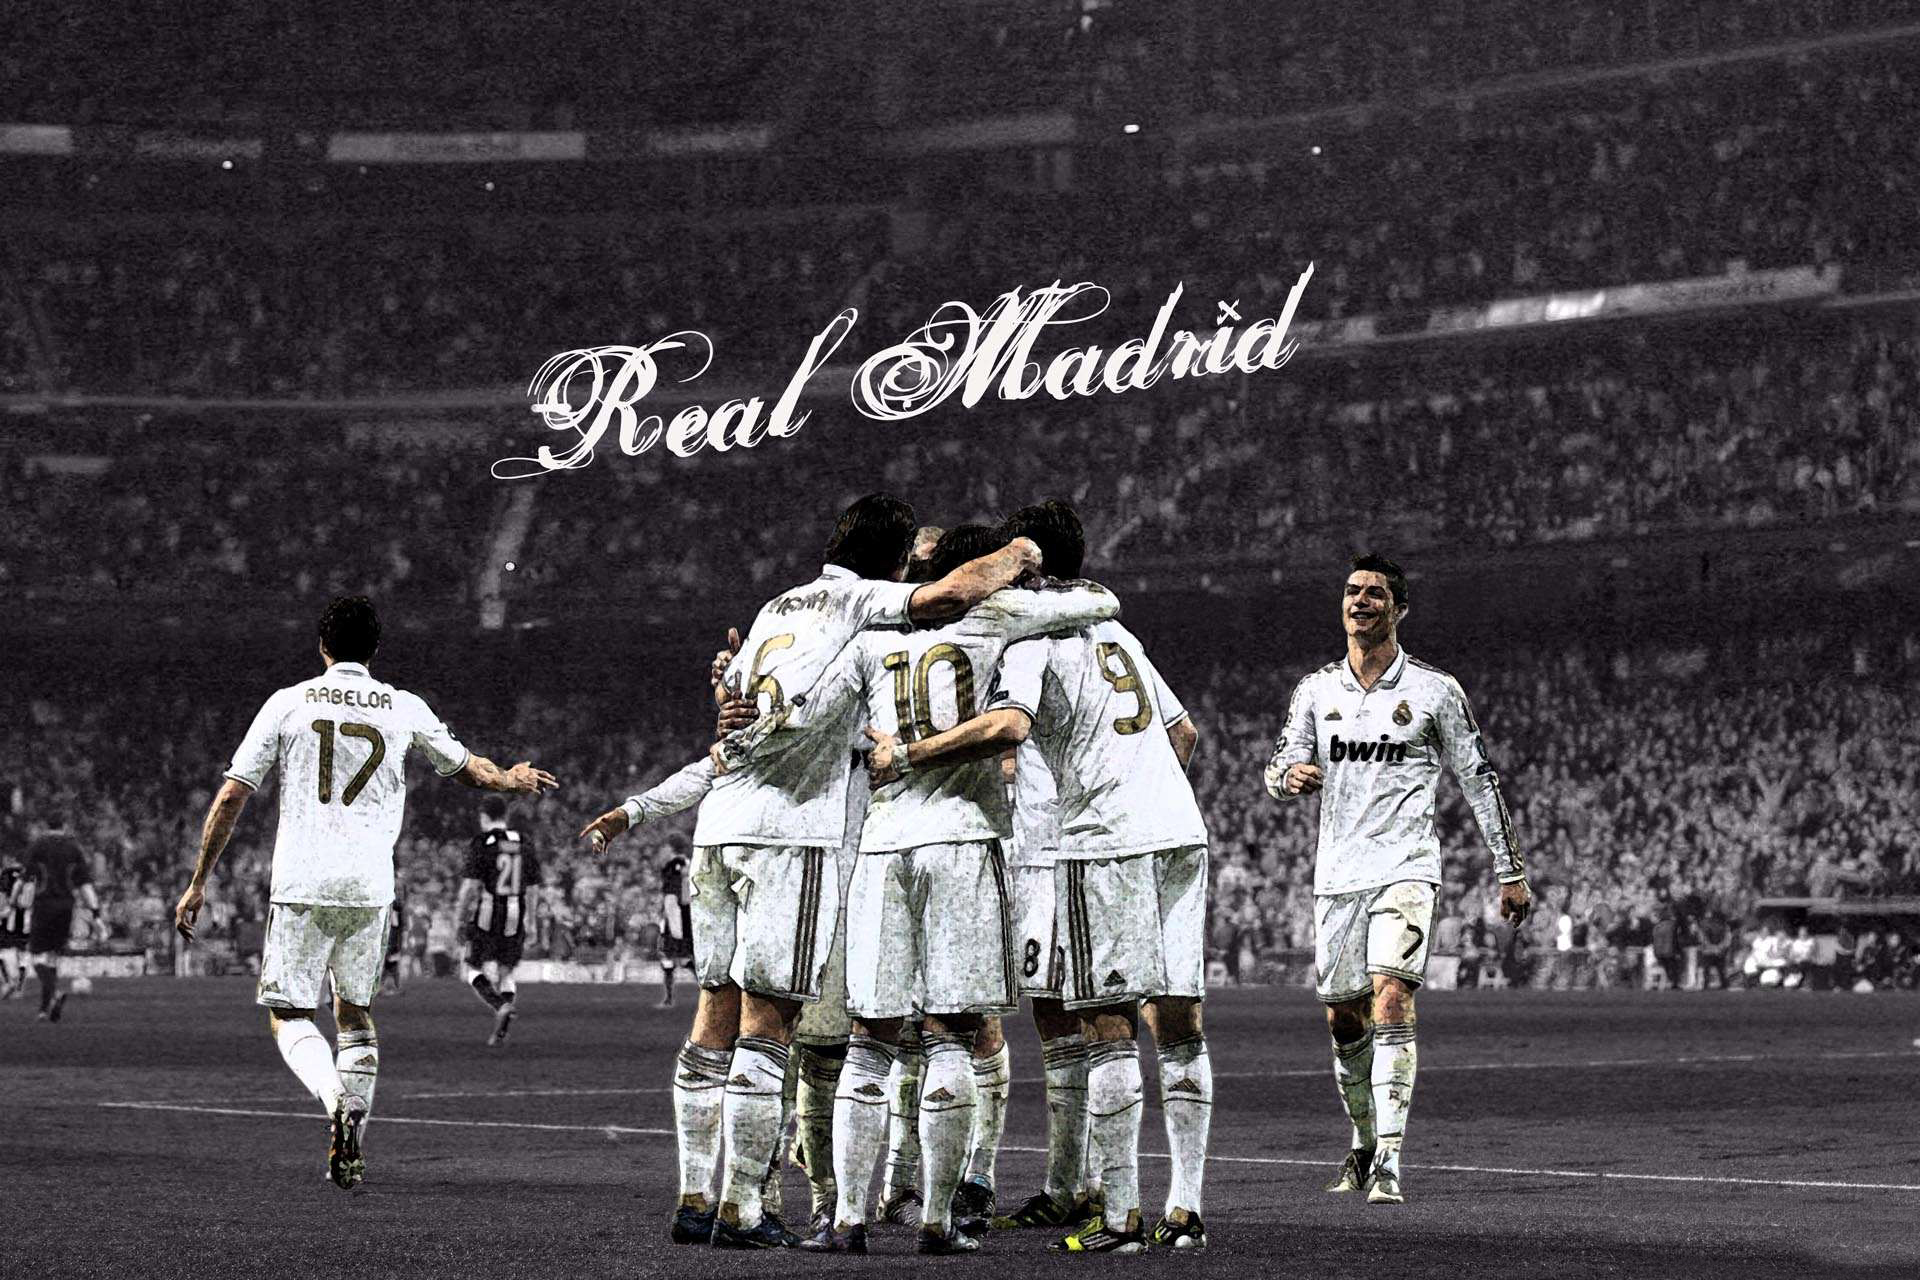 real madrid wallpaper,sport venue,player,team,competition event,stadium